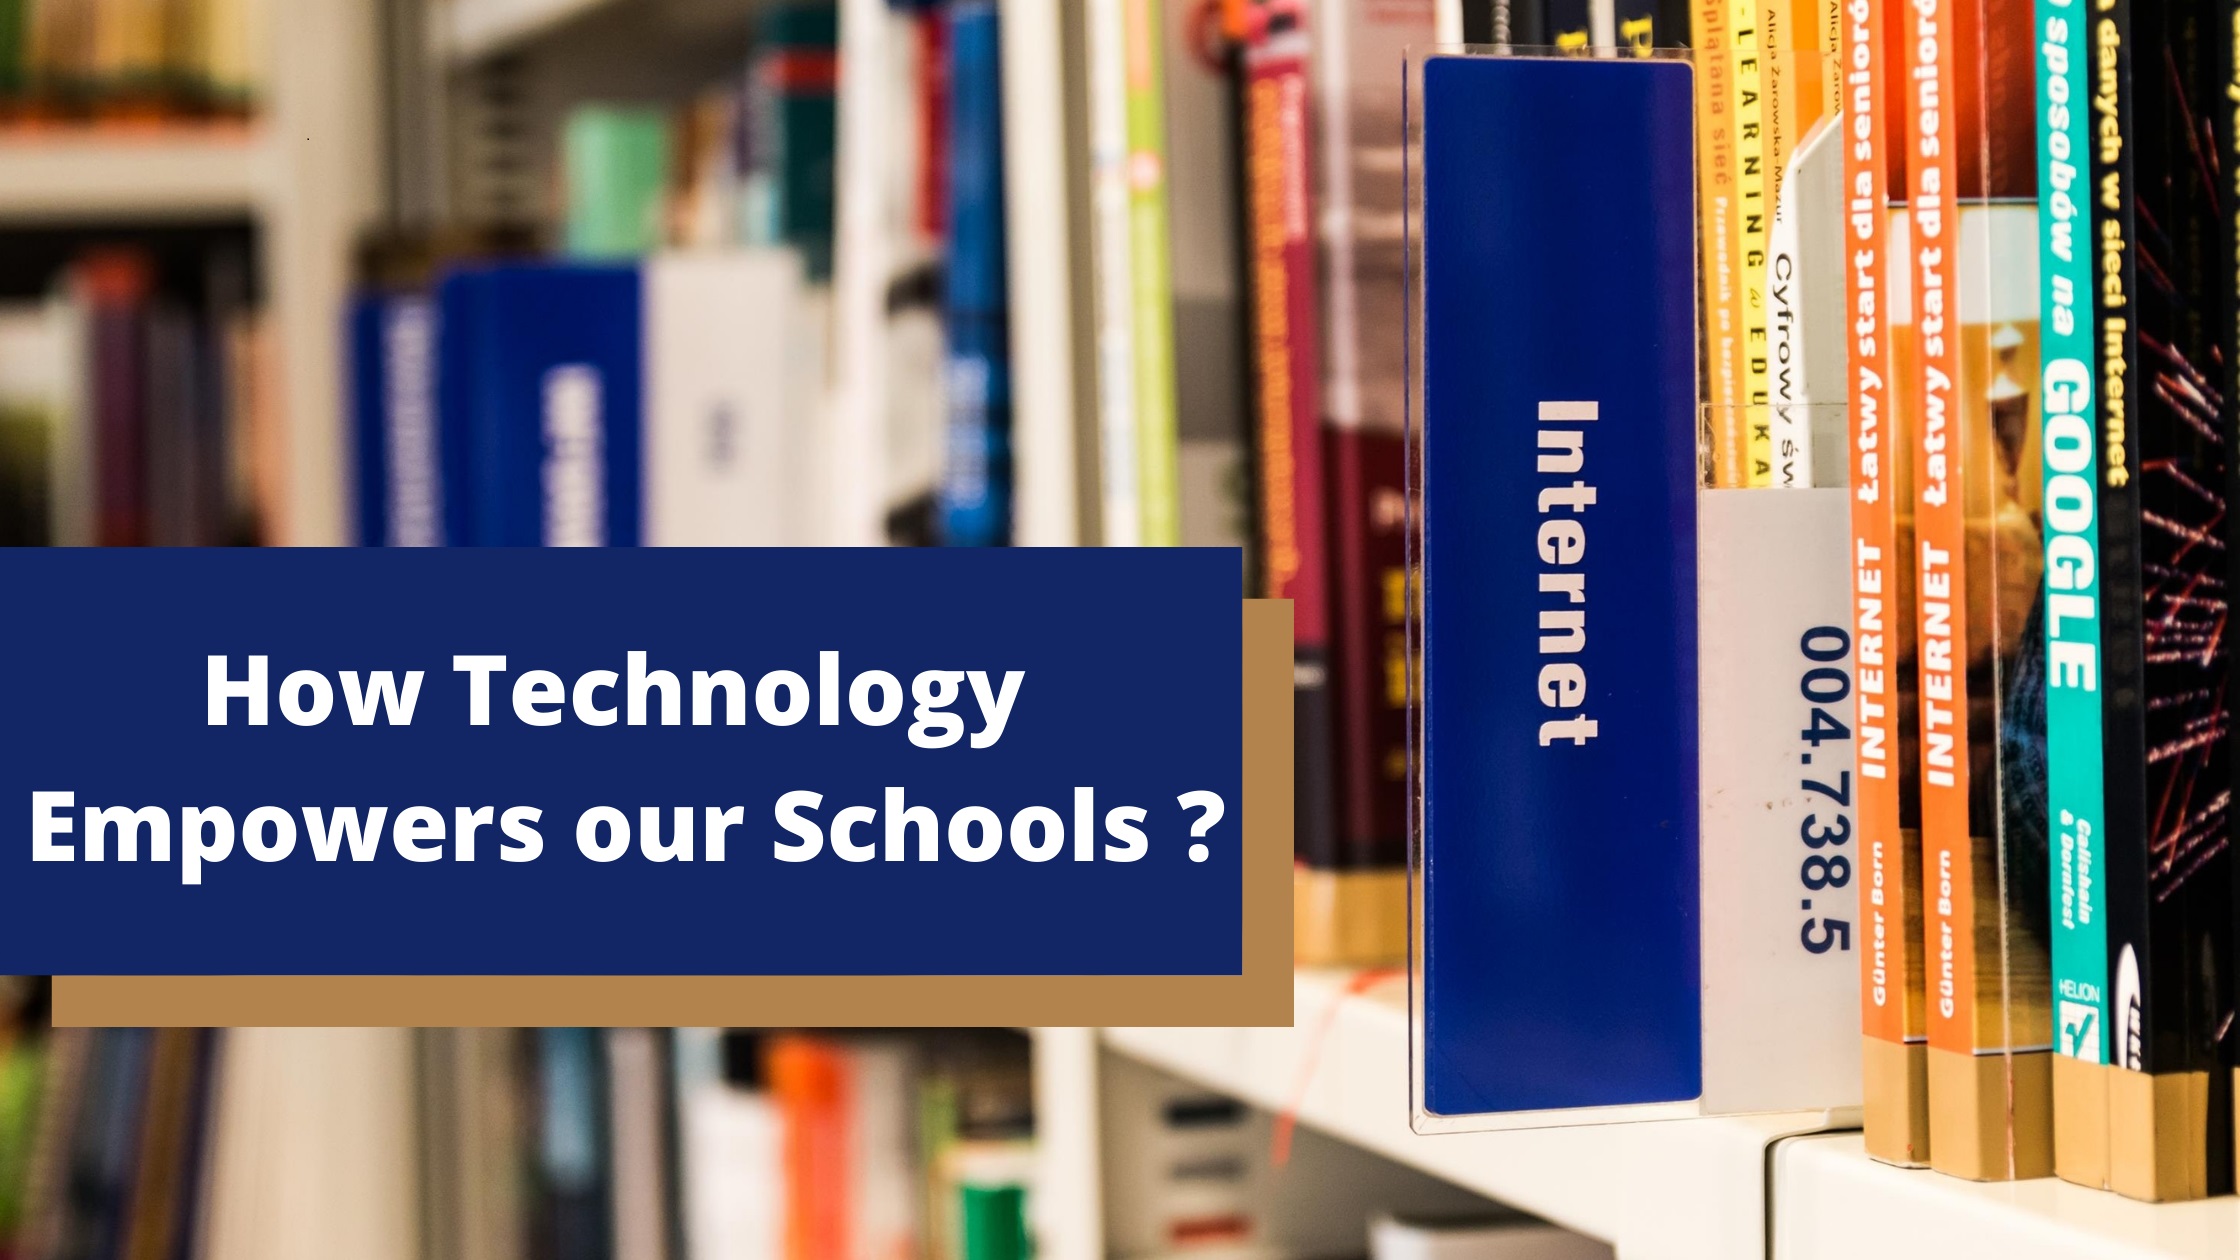 How Technology Empowers our Schools?